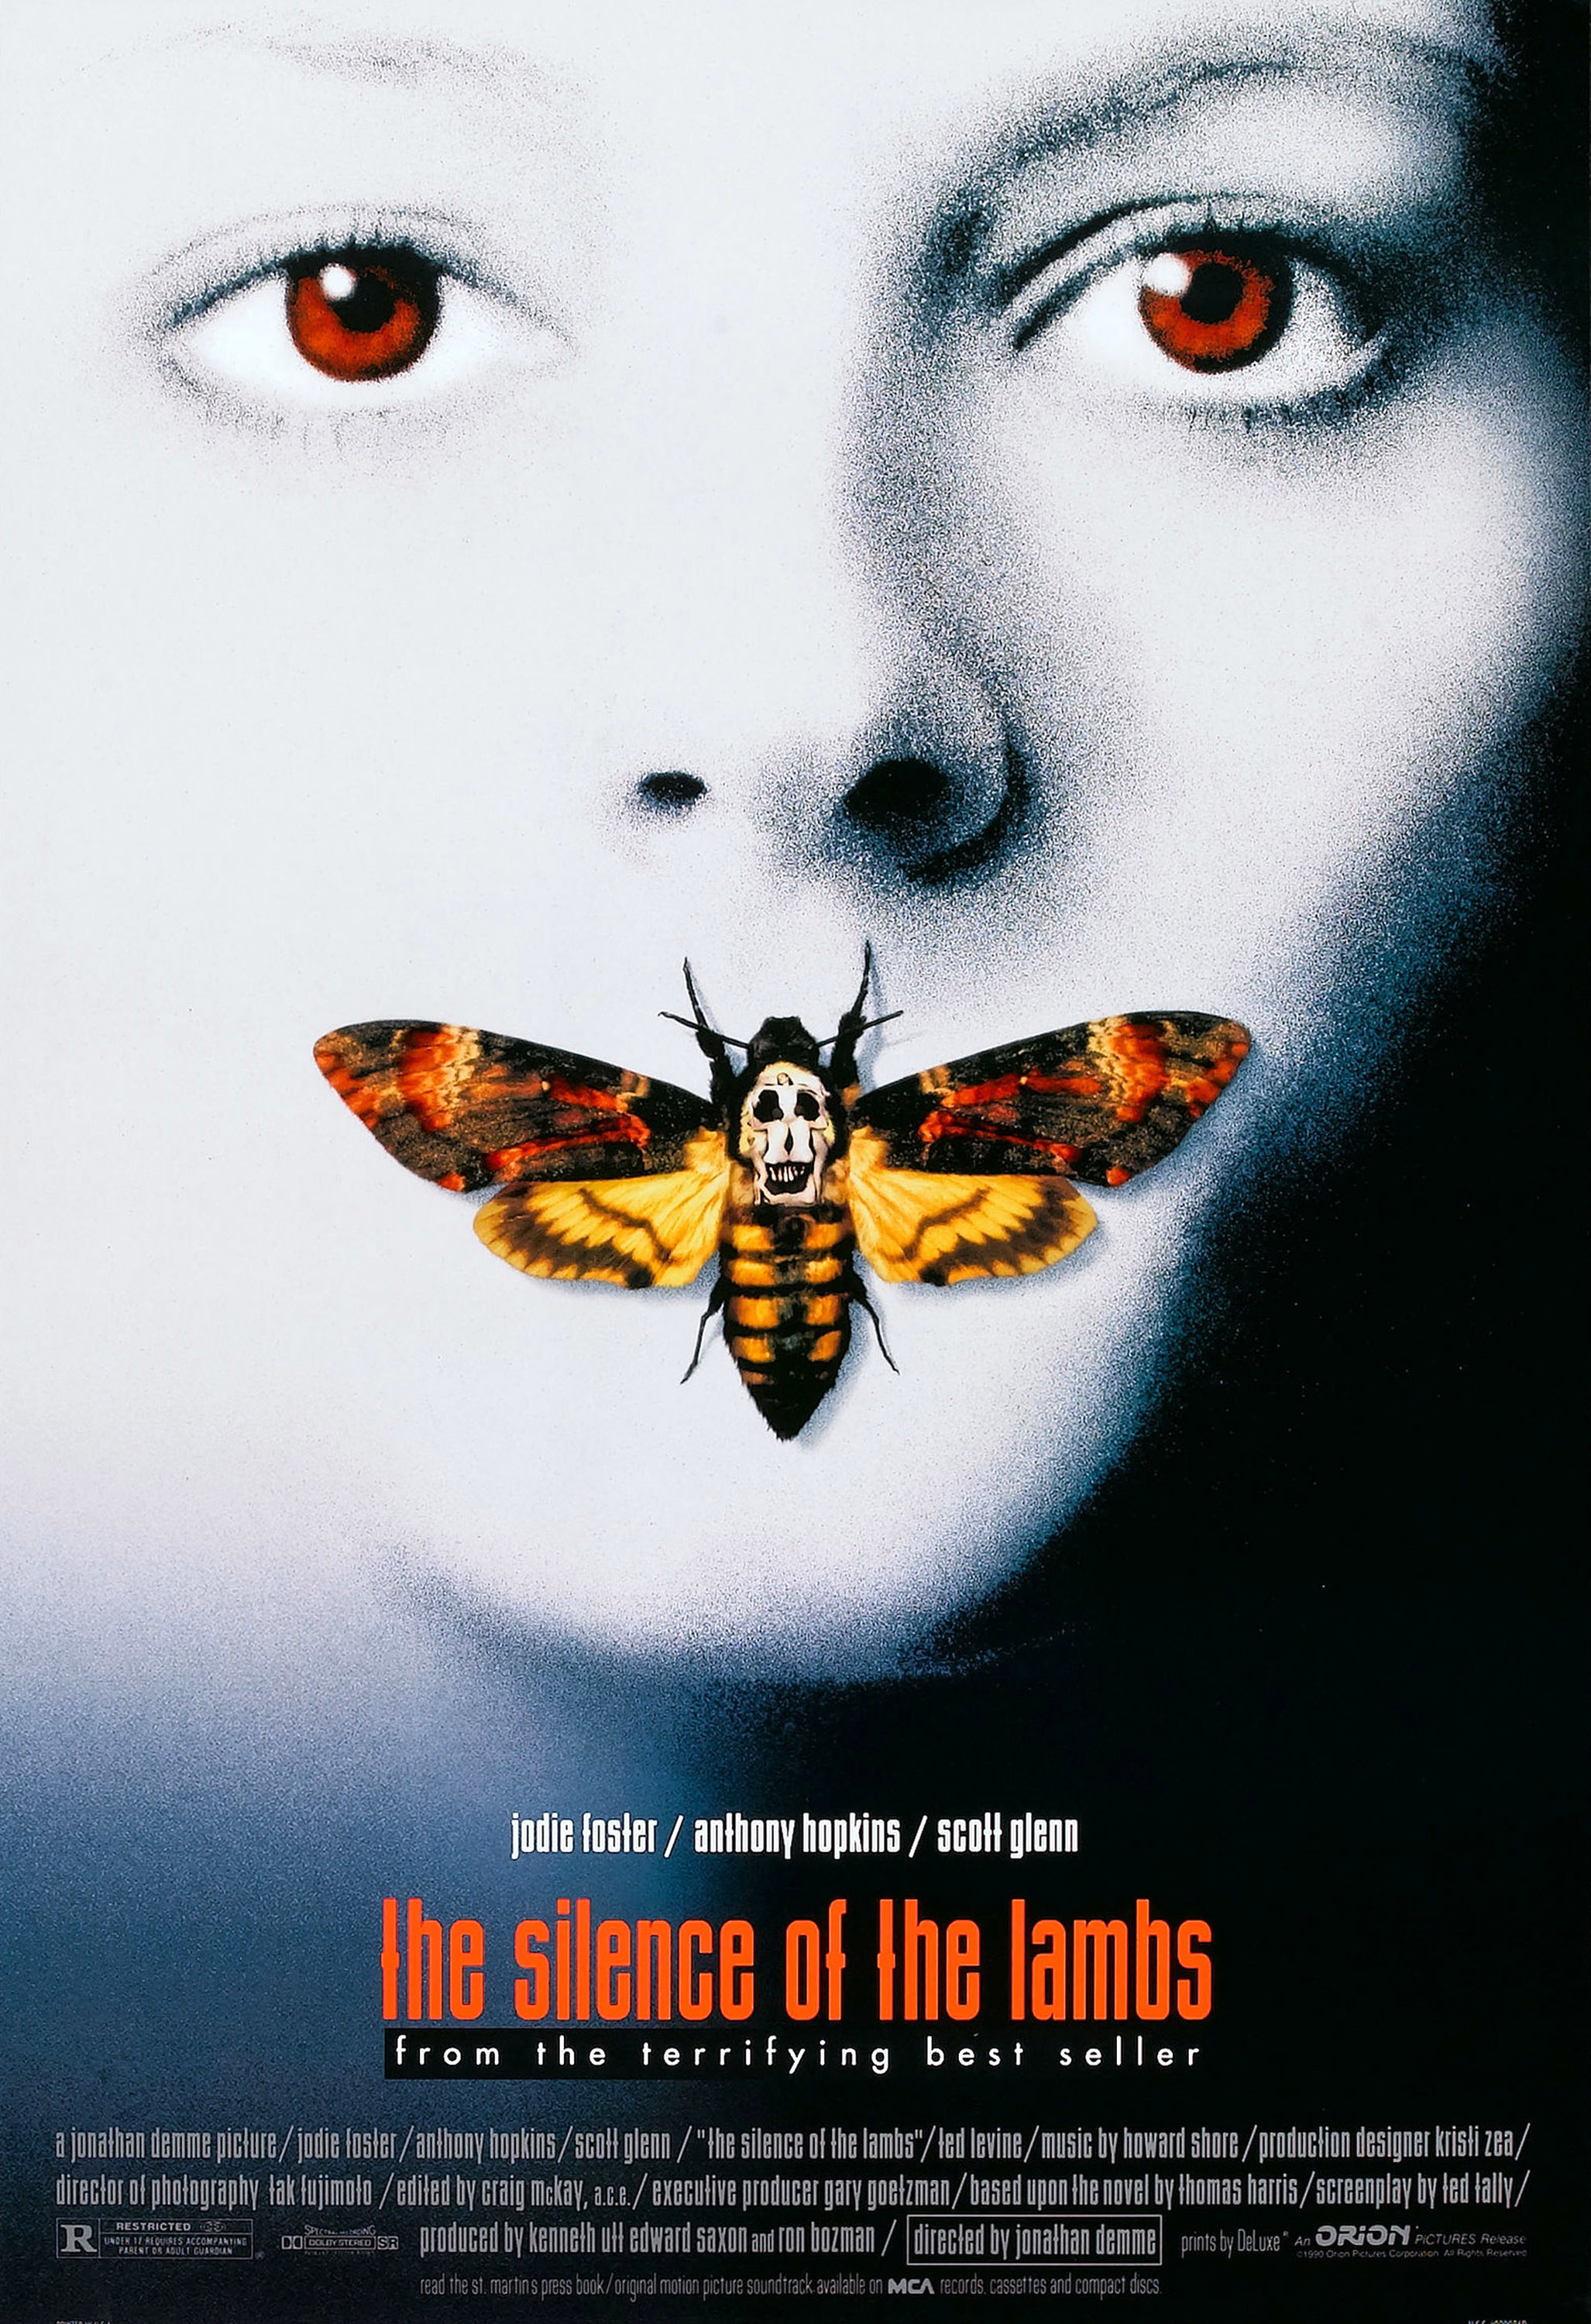 The theatrical poster for &quot;The Silence of the Lambs&quot;